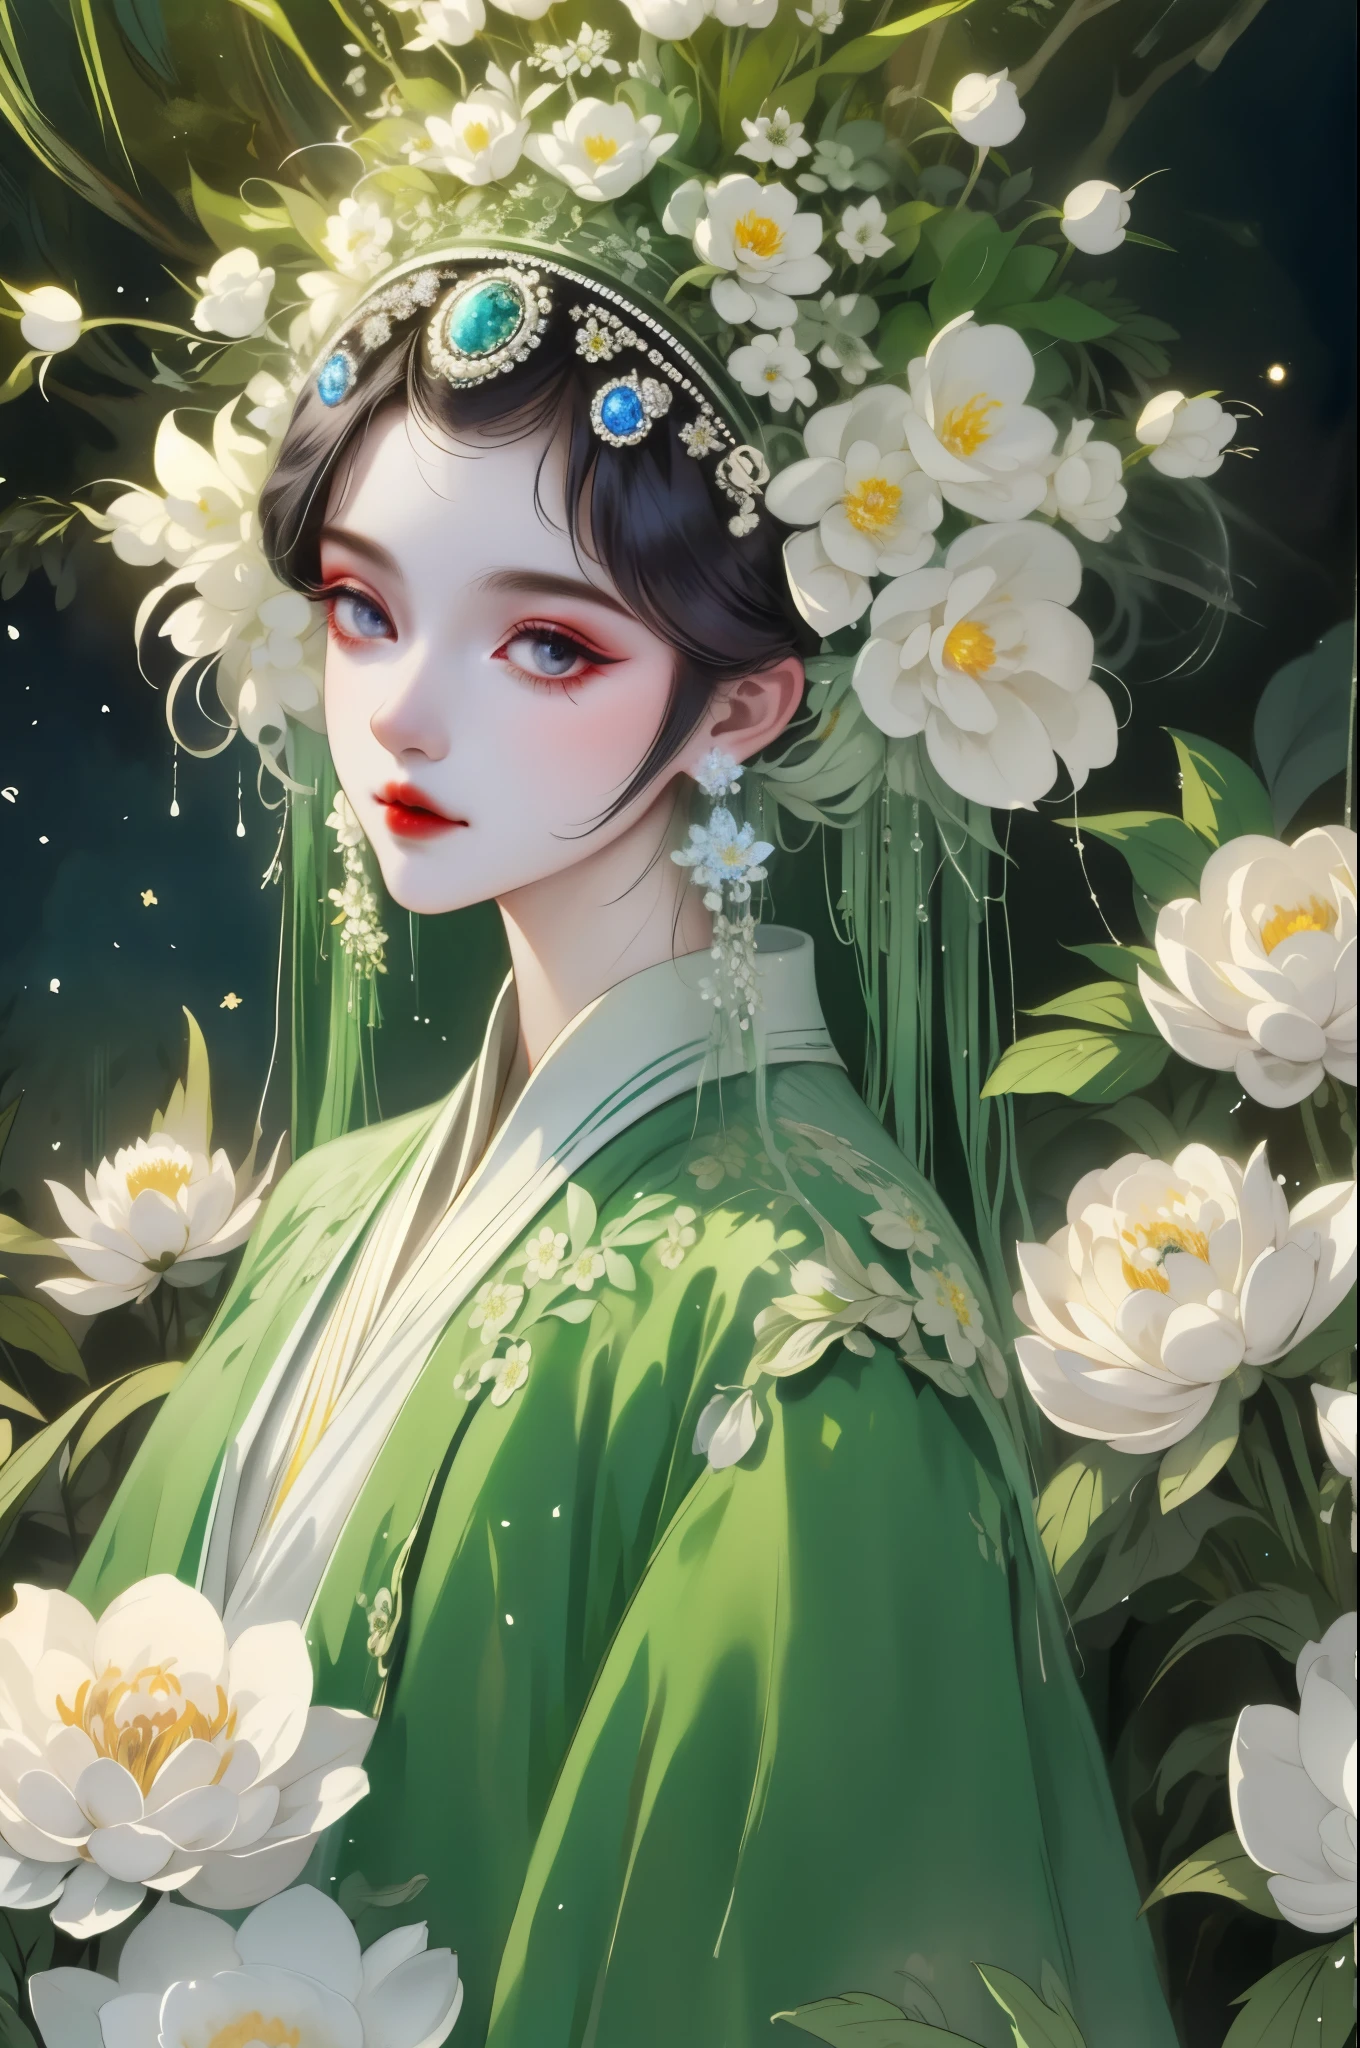 "queen of the forest，White peony, (masterpiece, best quality), (illustration), Strange fungal disease in dense forests, transparent viscous substance, Caustics, crystal, close up, intricate details, dark background, Sparkling spores, in the jungle，starlight，firefly